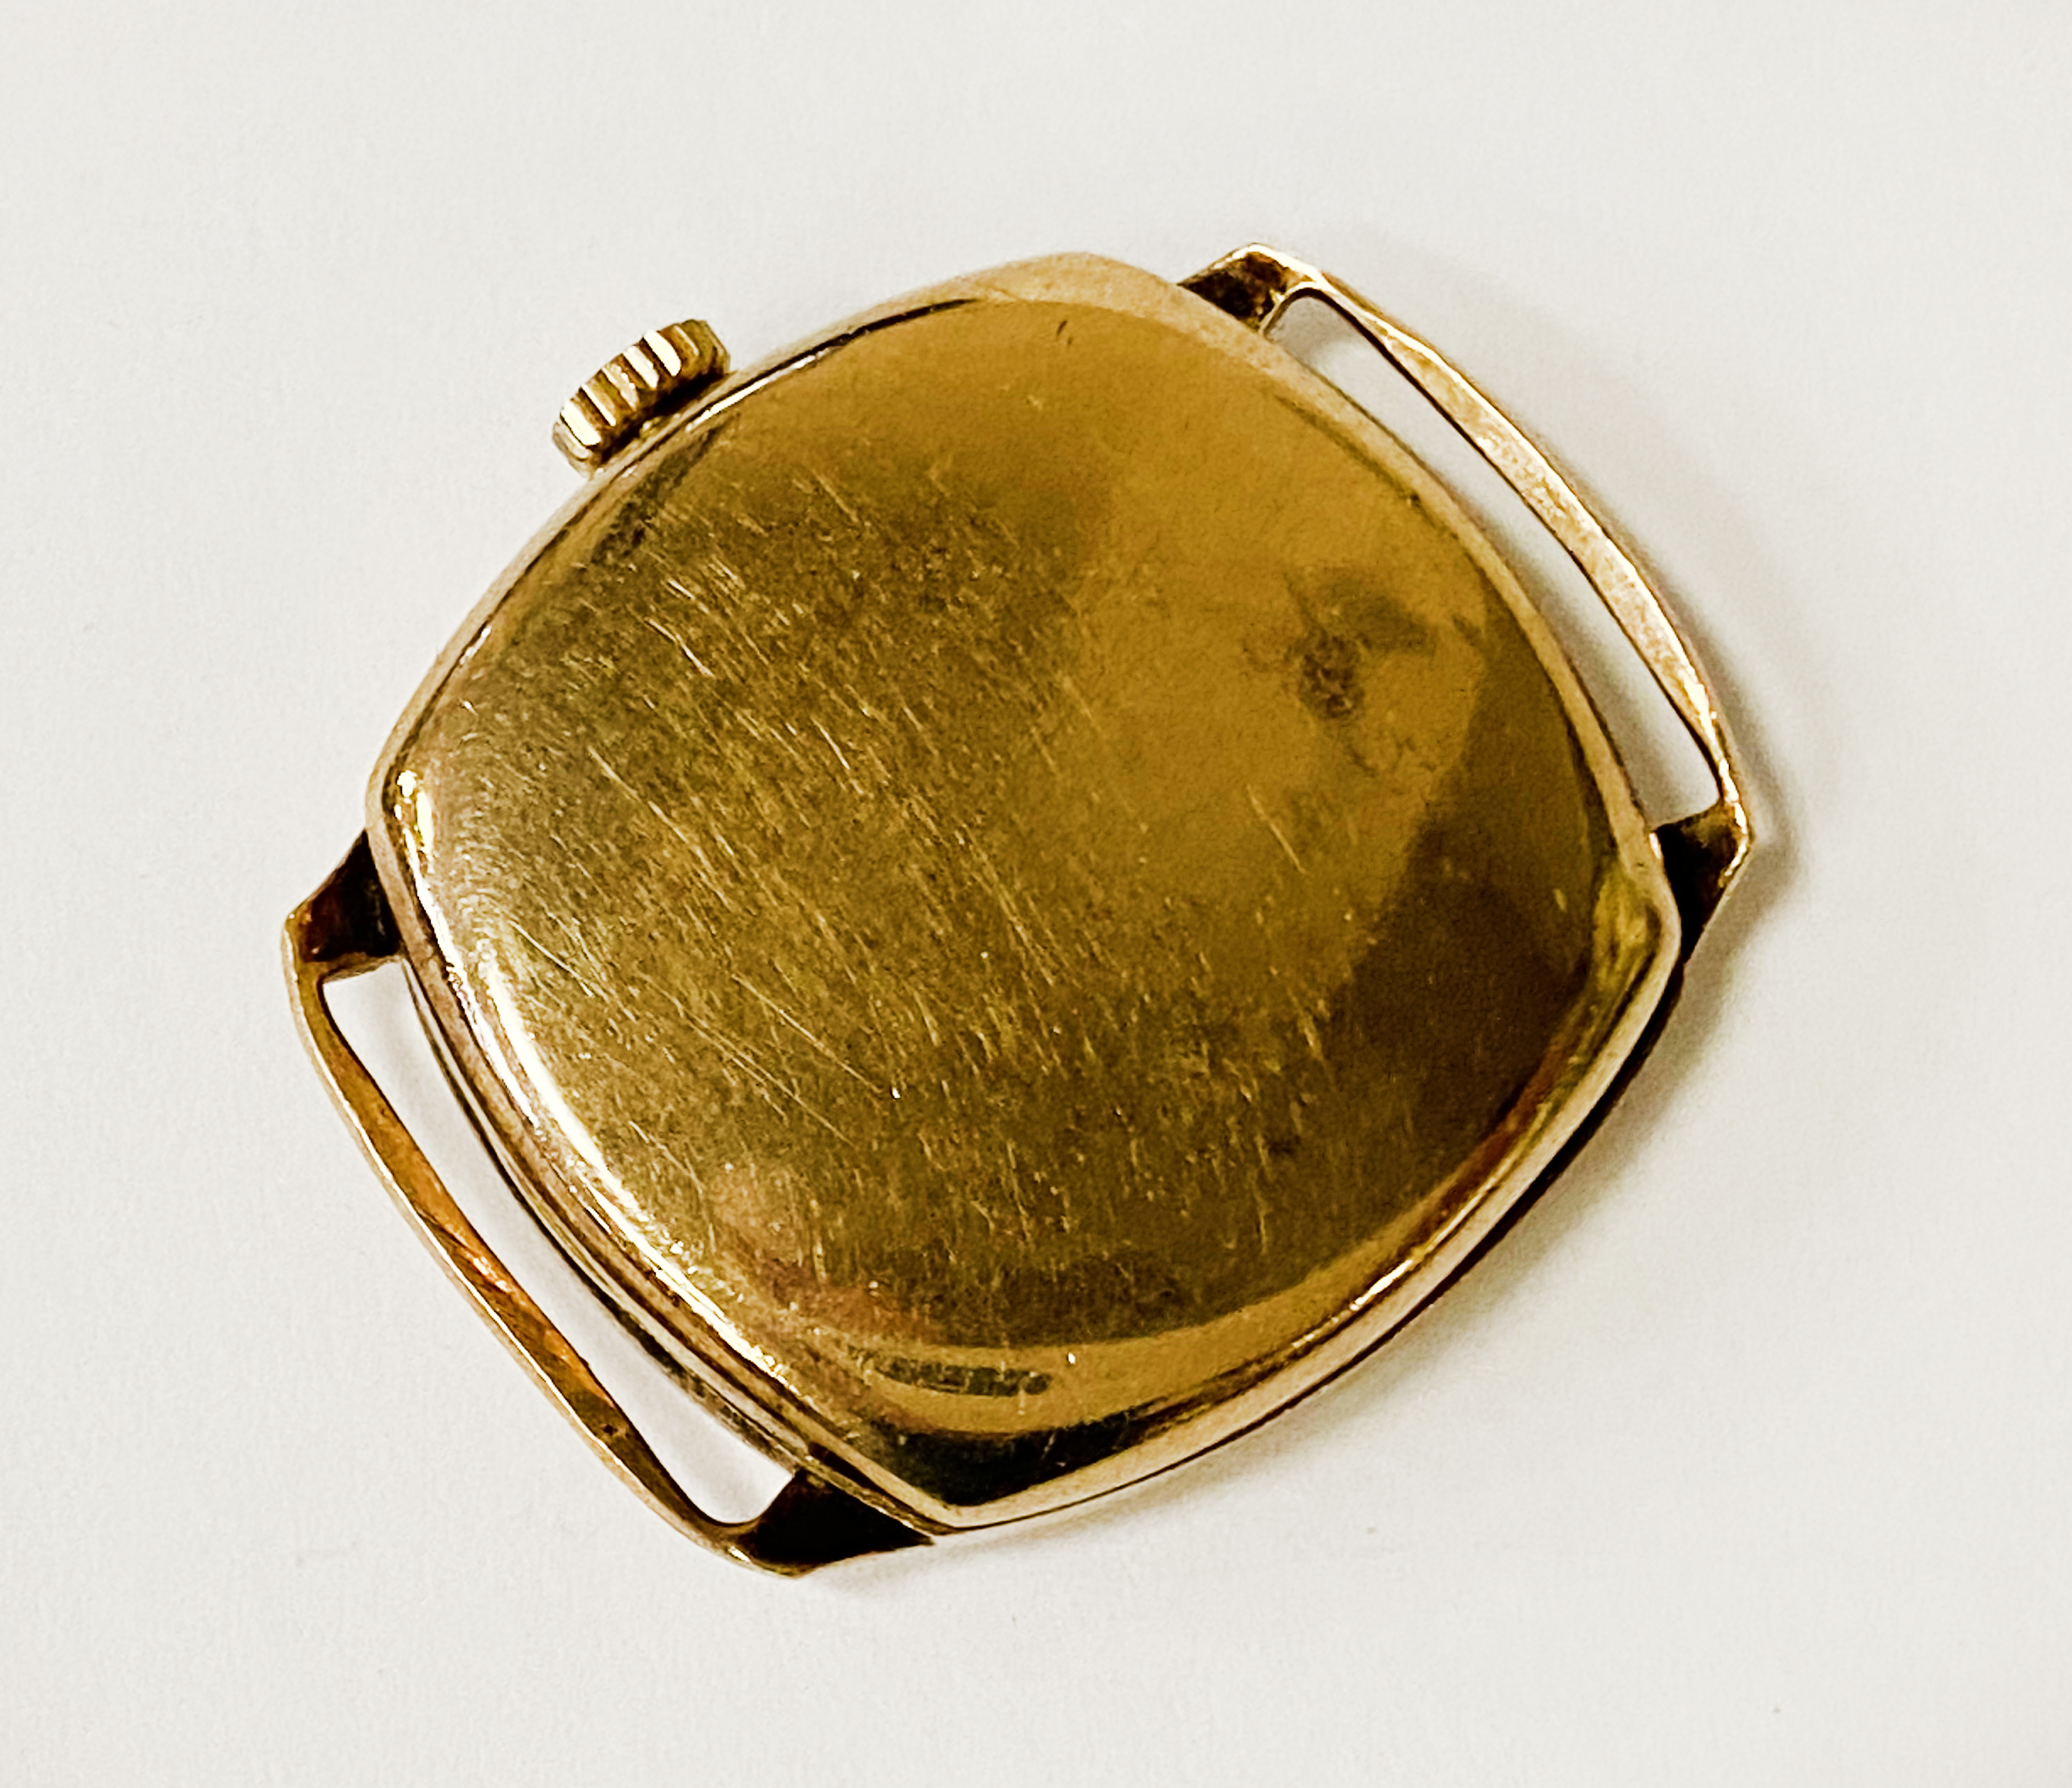 9 CT TUDOR GENTS WRISTWATCH IN DENISON CASE NEEDS AN HOUR HAND , MADE FOR ROLEX - WORKING - Image 2 of 2